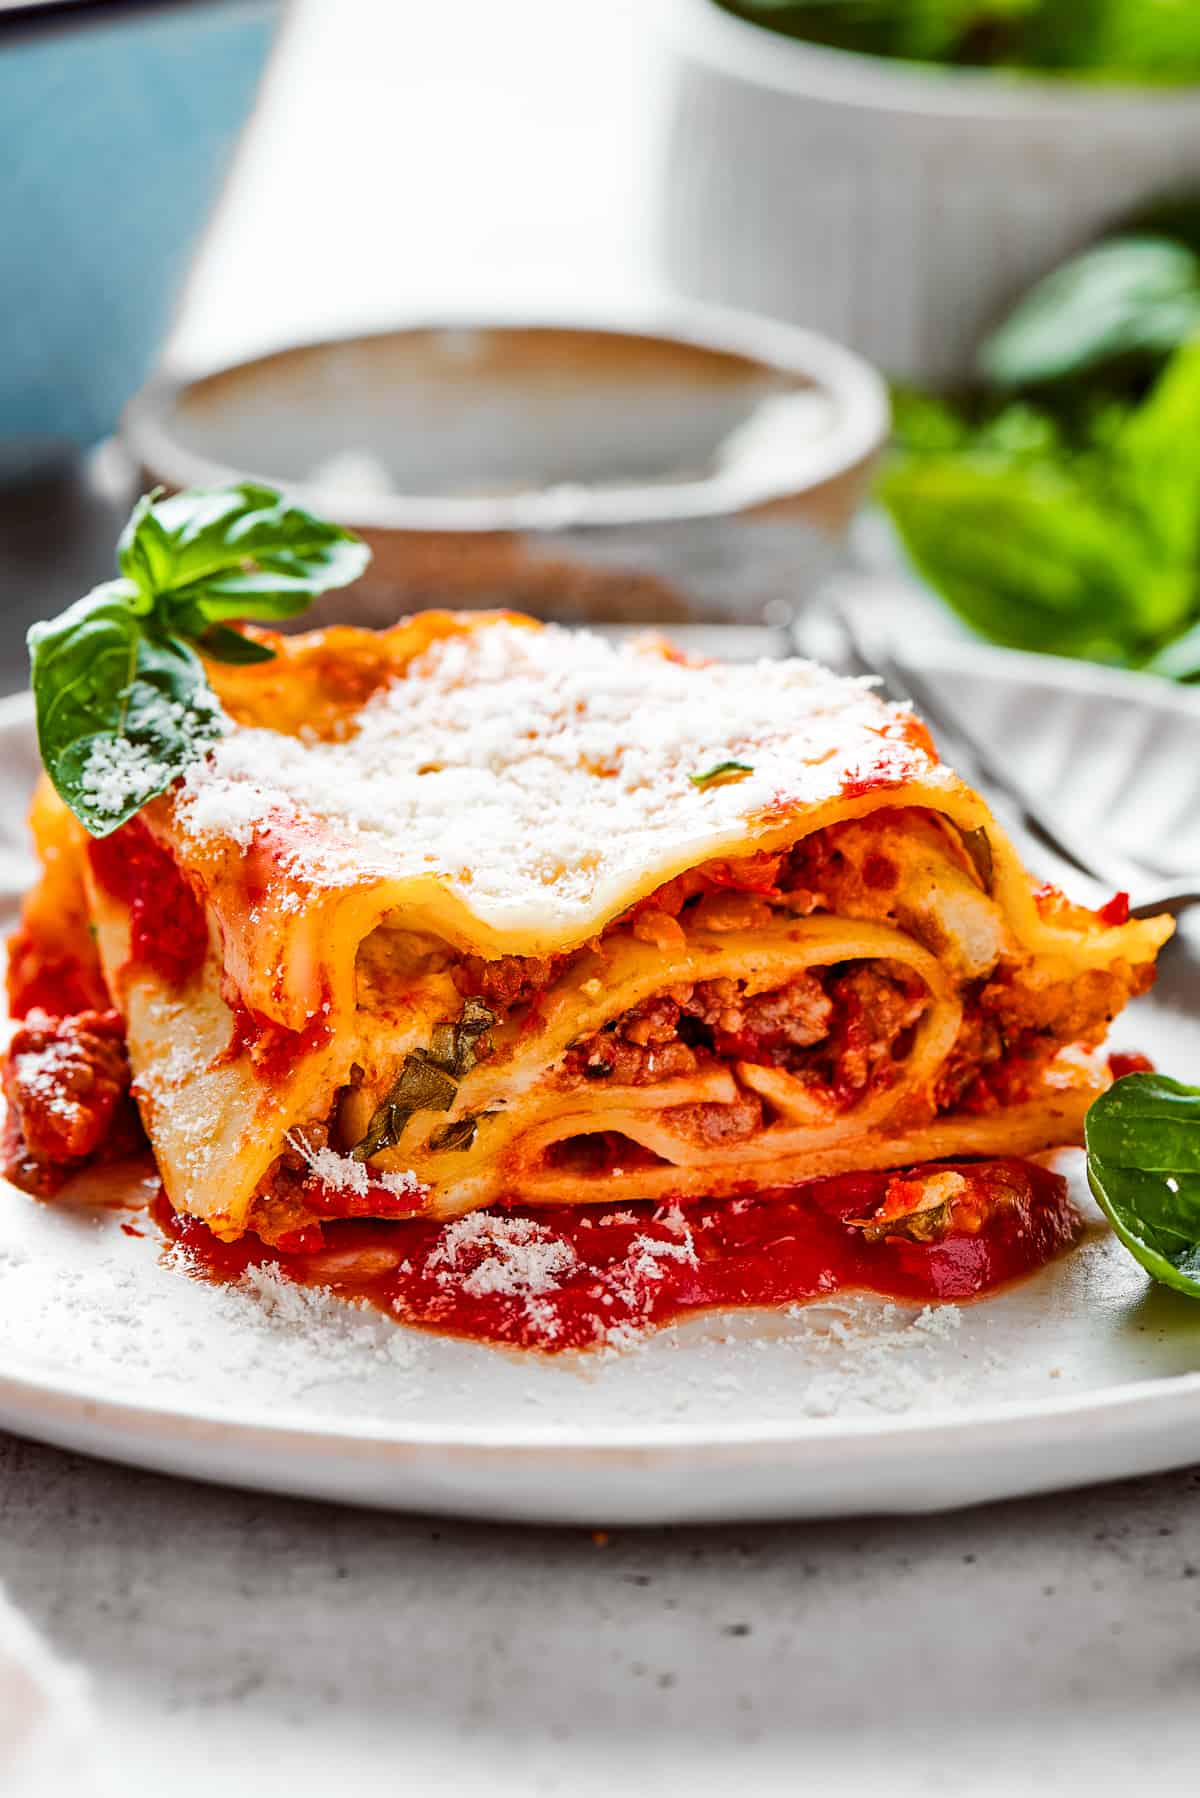 Lasagna roll up served on a white dinner plate and garnished with fresh basil leaves.